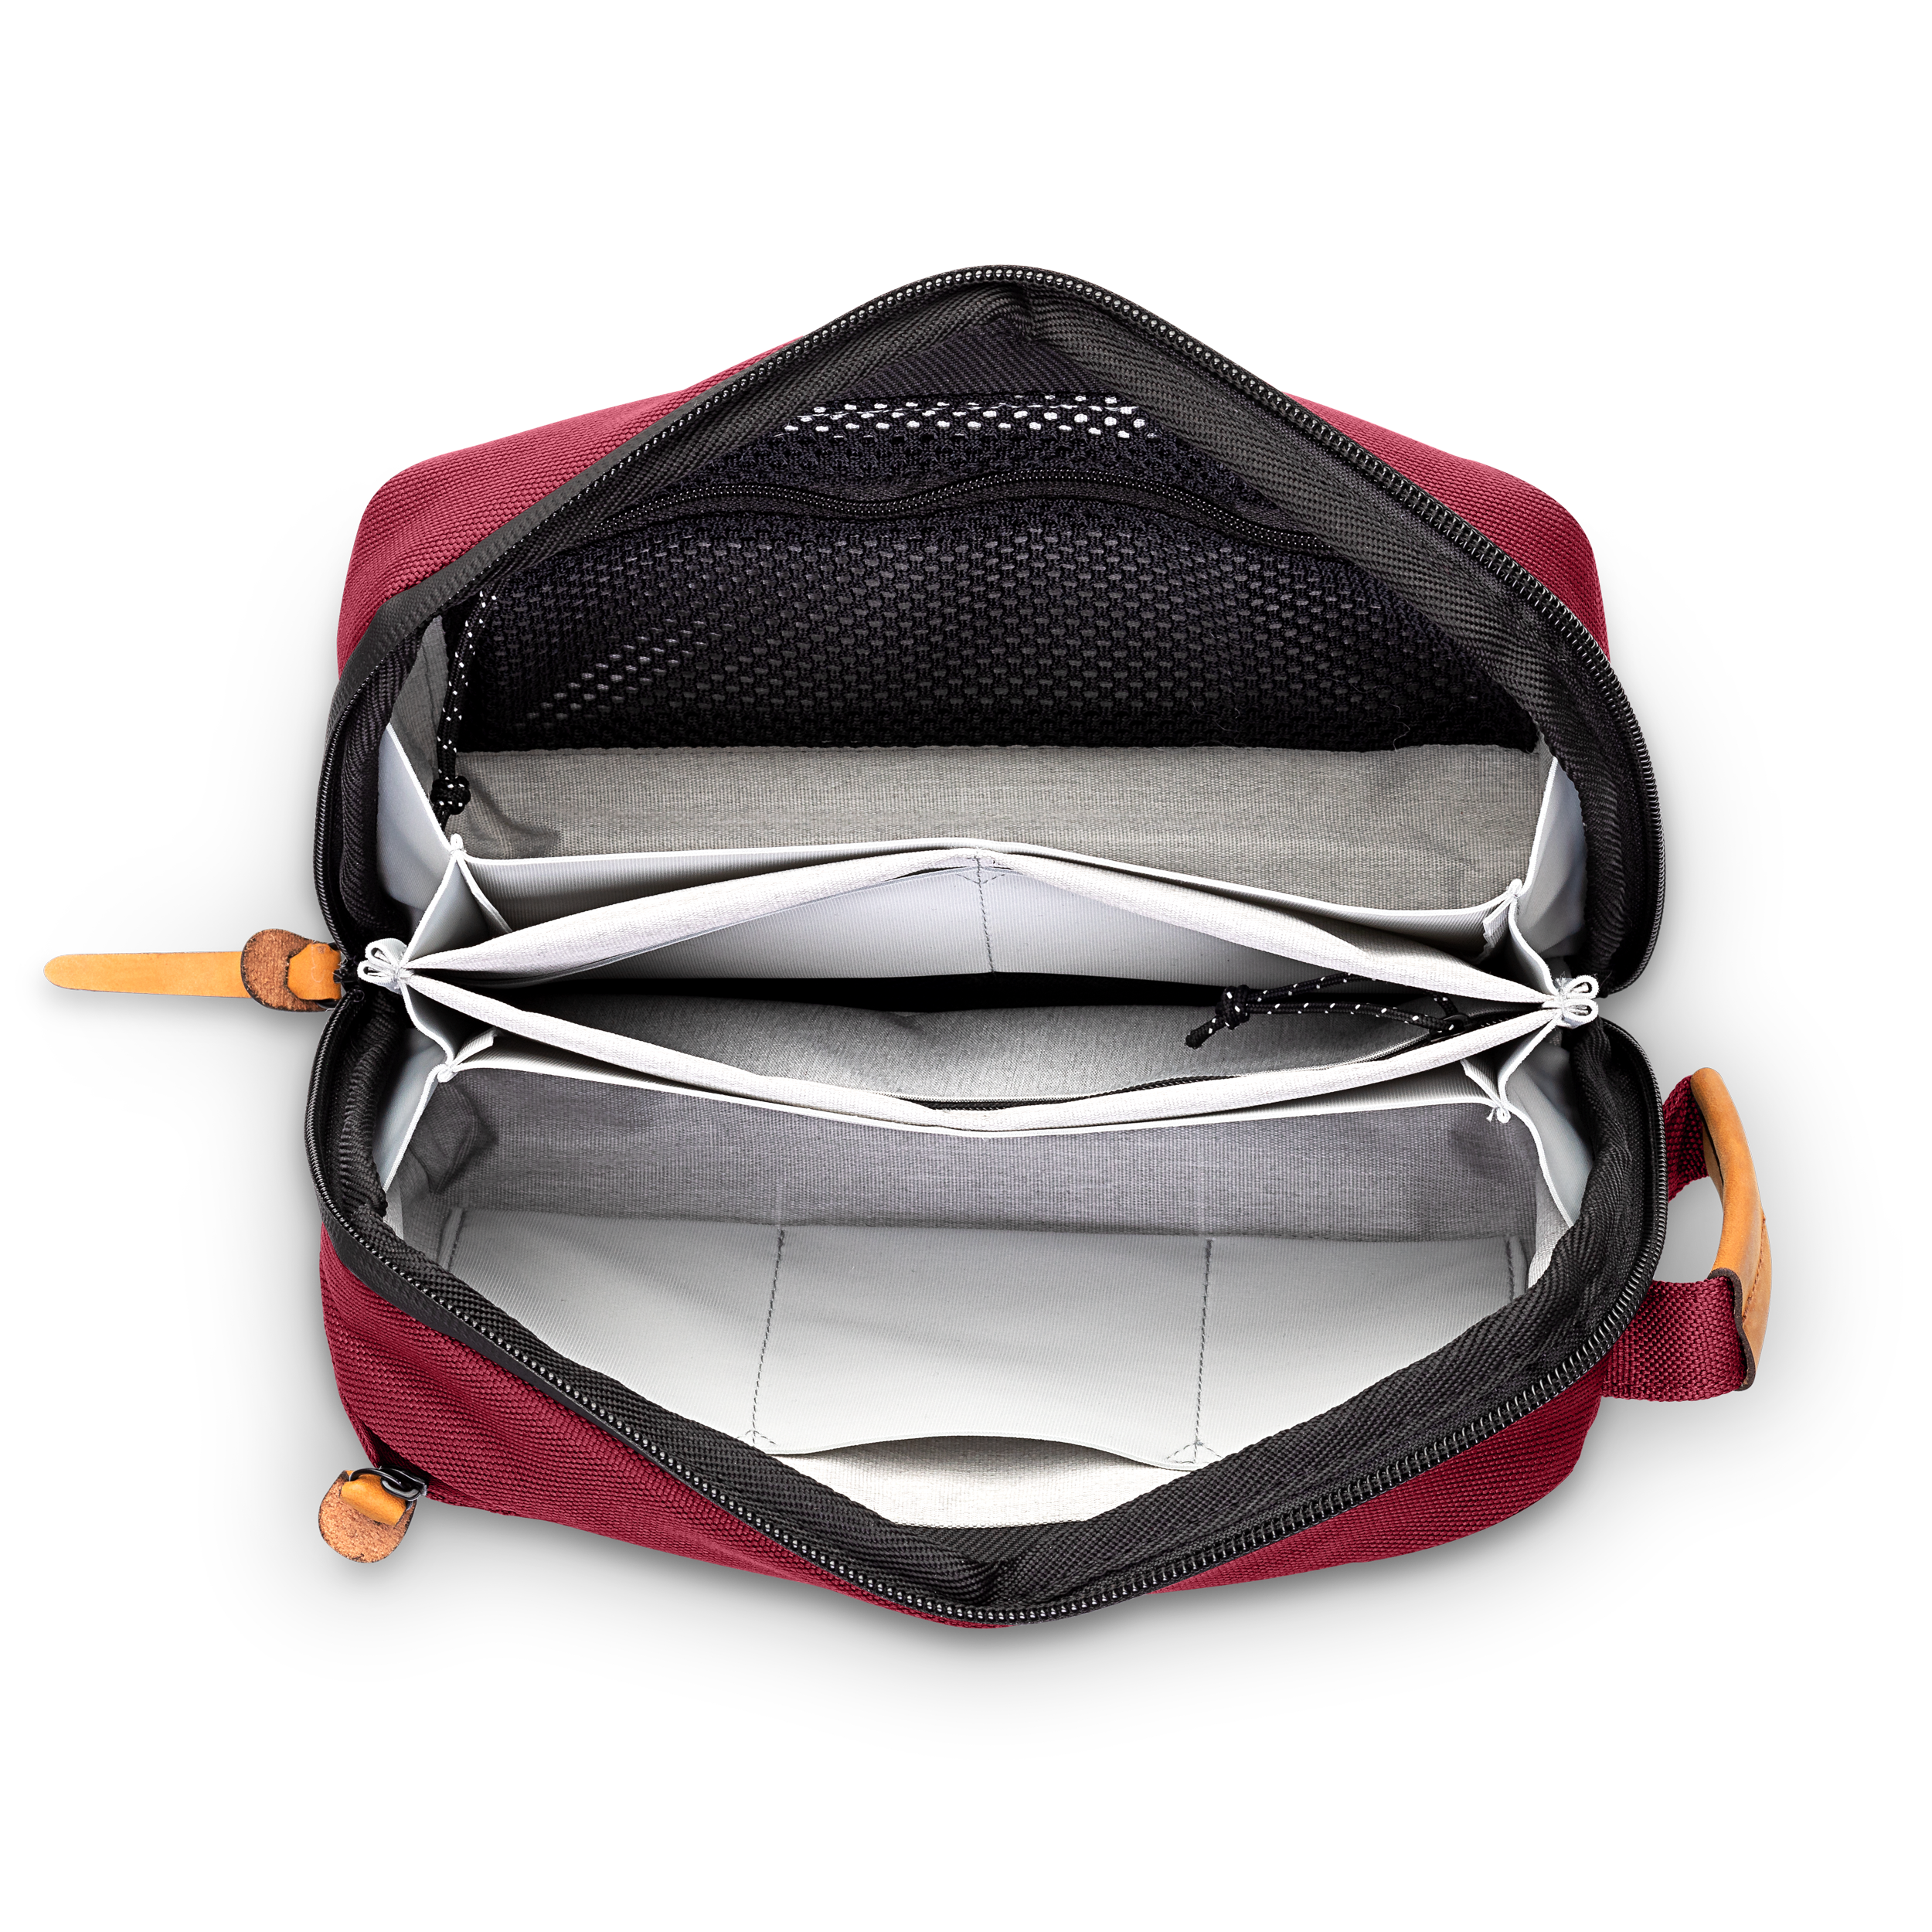 Image 1 - Burgundy Empty Bag Top Down.PNG